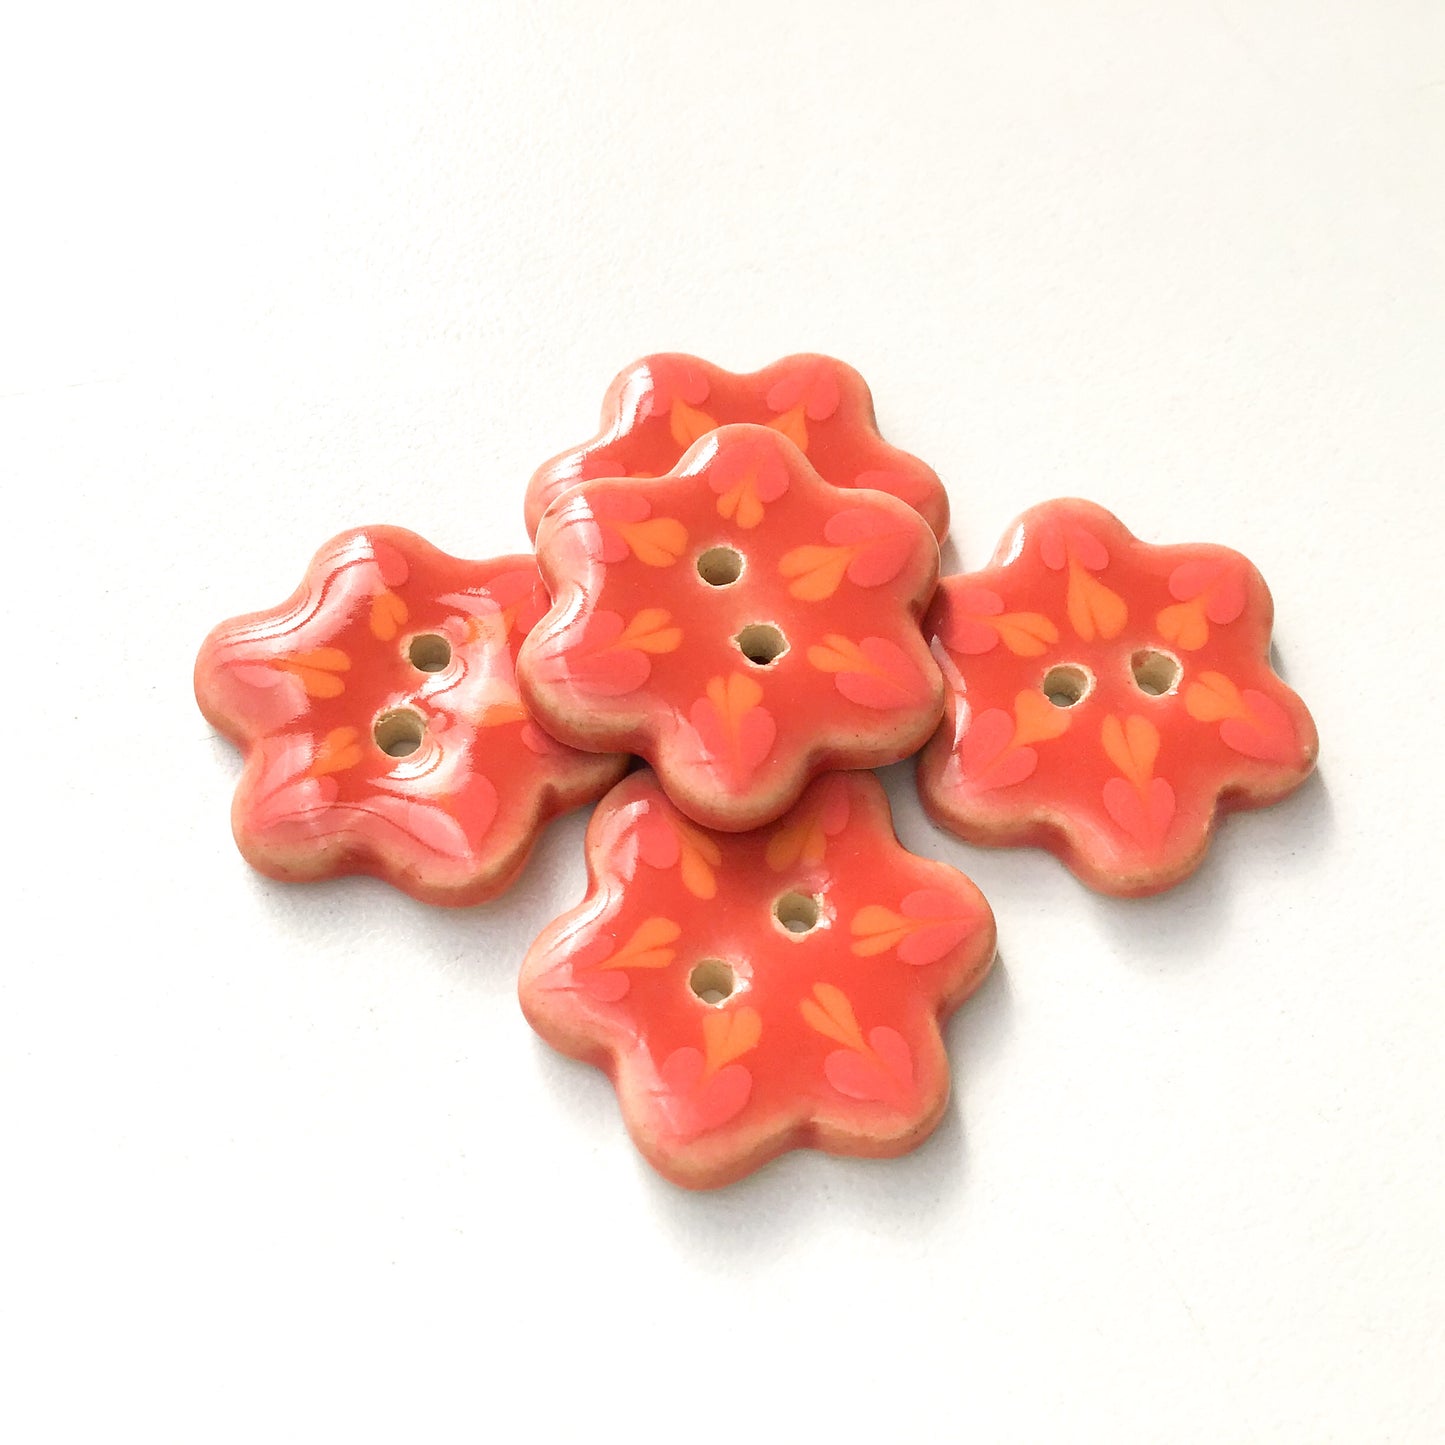 Salmon Pink Flower Buttons with Coral & Orange Detail - Ceramic Flower Buttons - 1" - 5 Pack (ws-186)